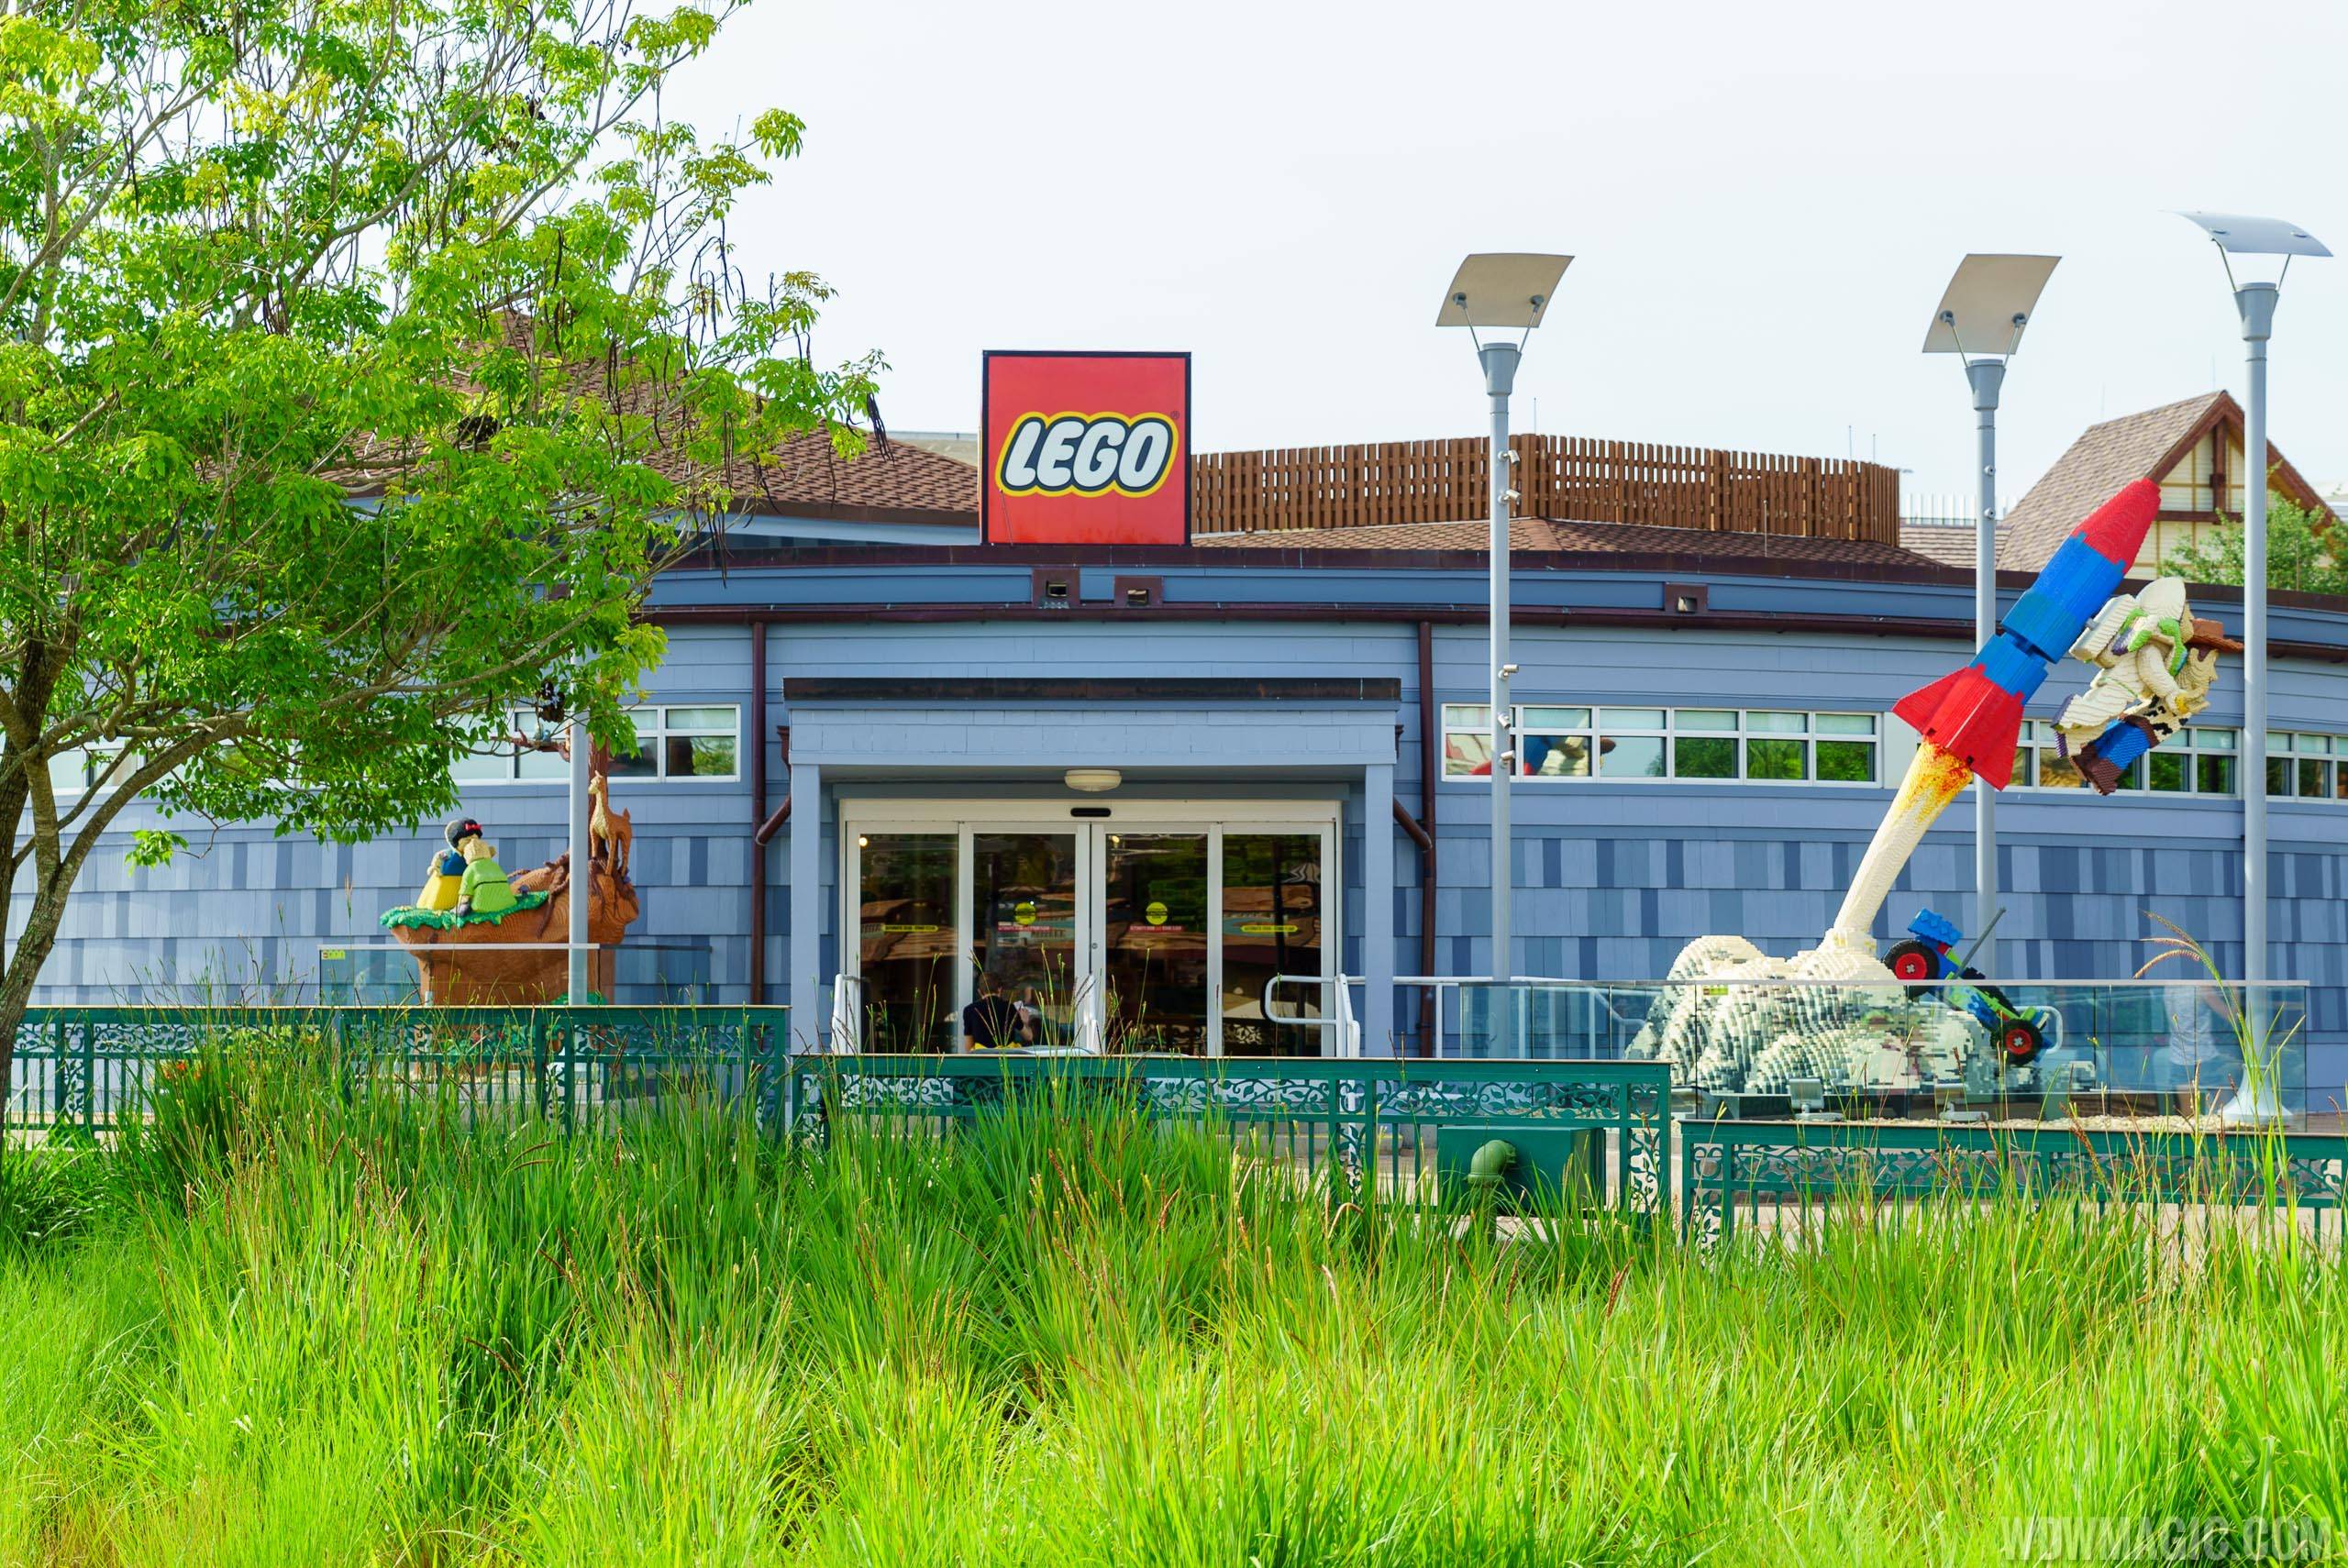 PHOTOS - New look for the LEGO Store at Disney Springs 